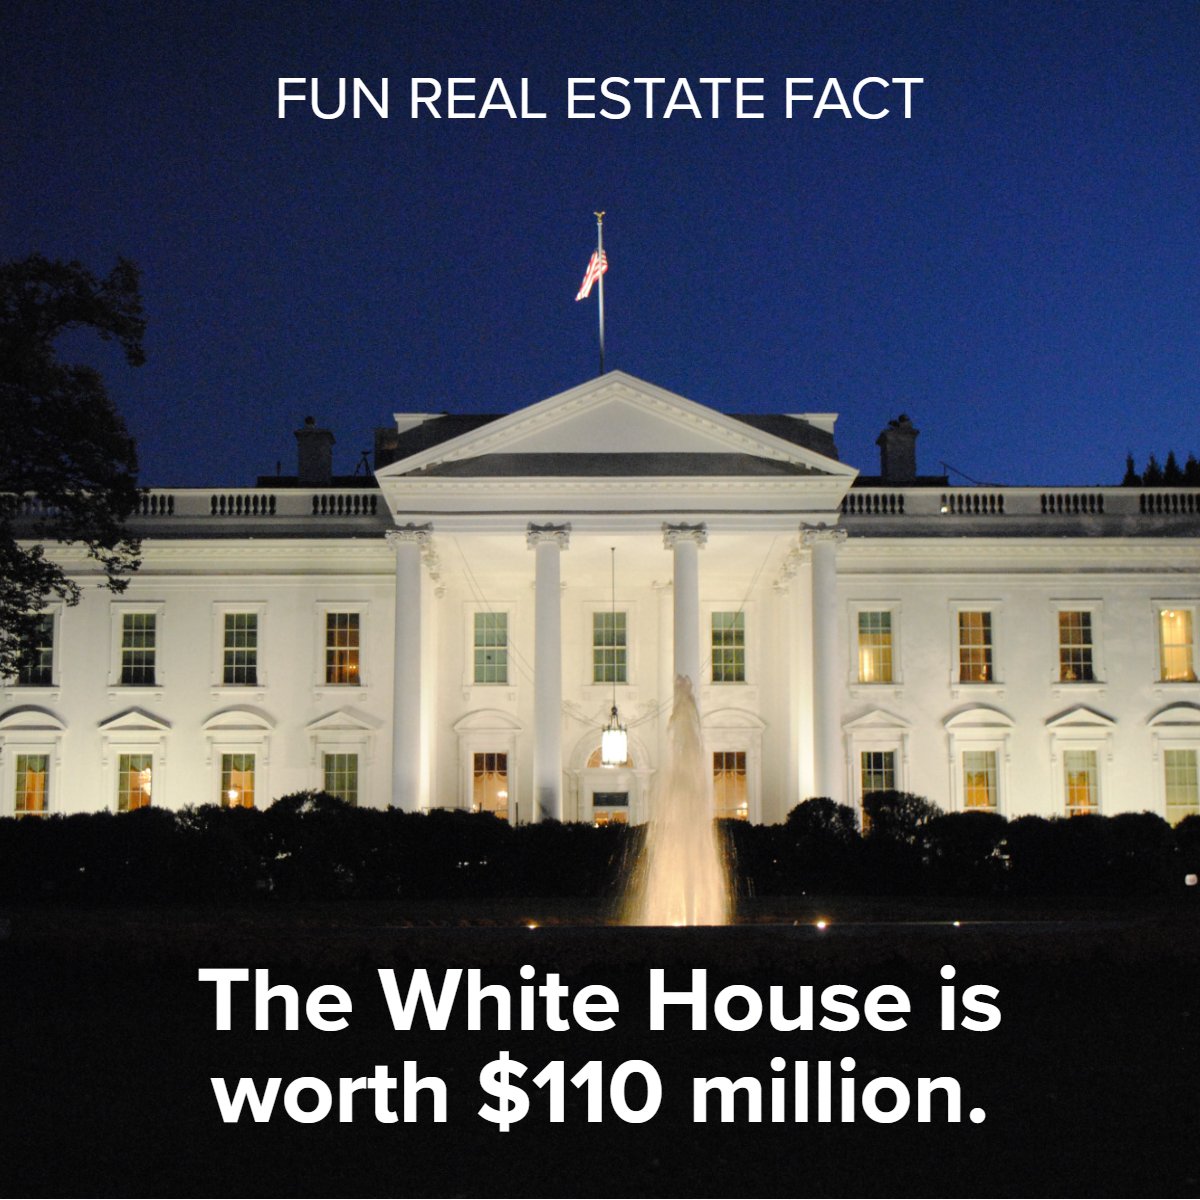 Did you know? 

The White House is worth $110 million. 💰🏛️

#fact    #didyouknow    #factsdaily    #knowledgeispower    #whitehouse    #funfact    #realestate
#realtynewengland #mannymenezesgroup #realtyne #wesellnewengland #welovenewengland #ilovenewengland